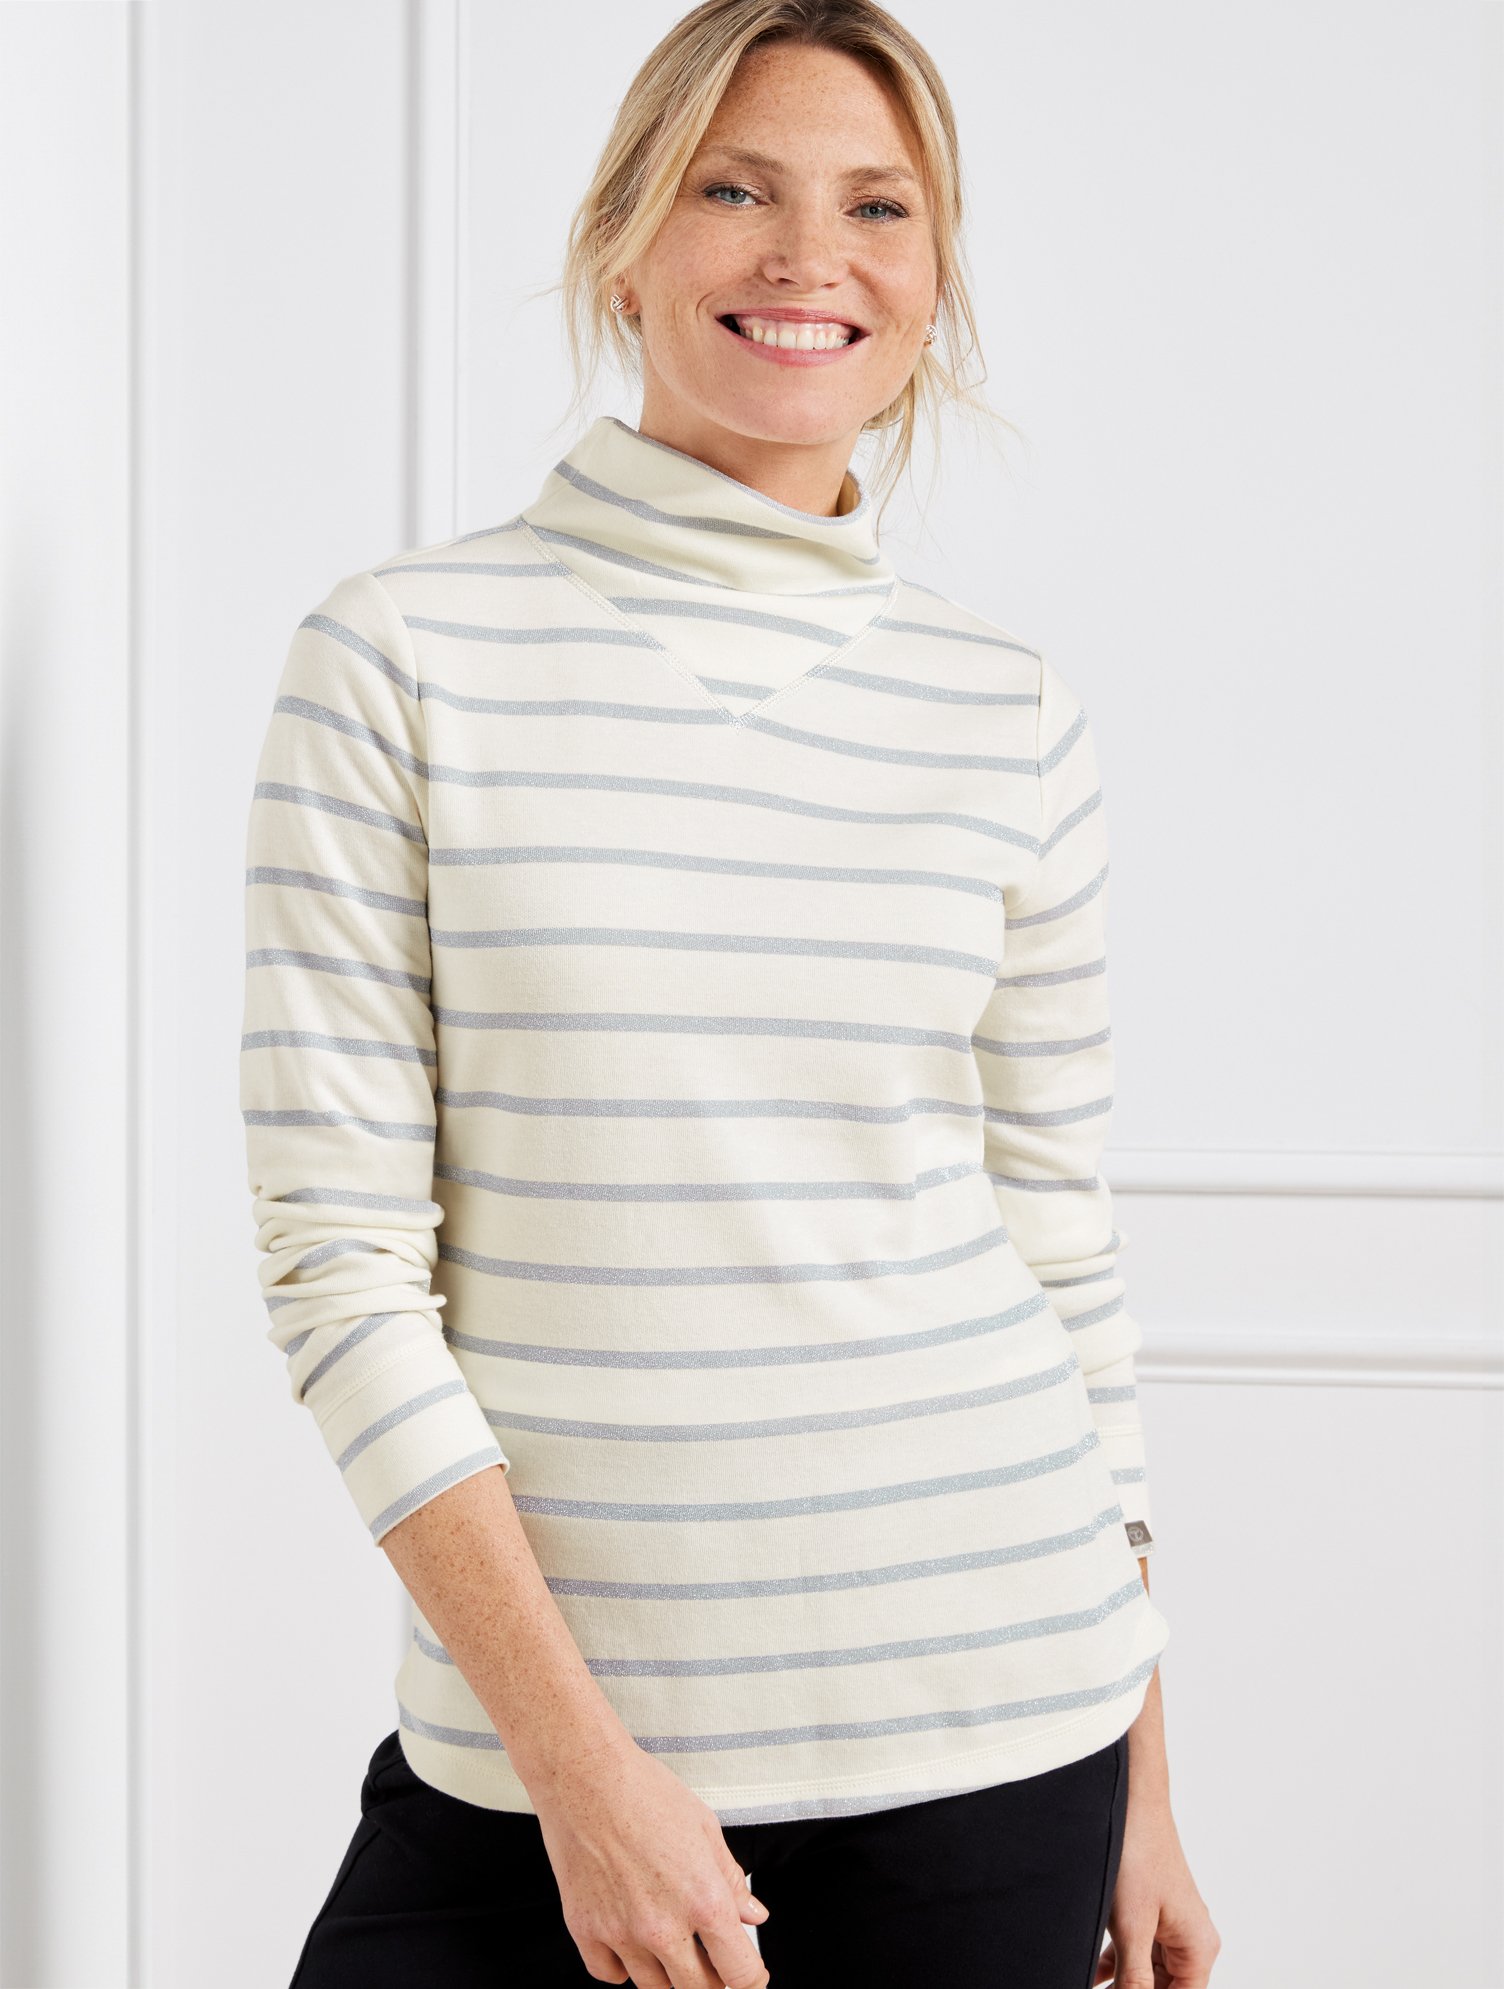 Talbots Supersoft Jersey Mockneck T-shirt - Metallic Trail Stripe - Ivory/silver - 3x  In Ivory,silver